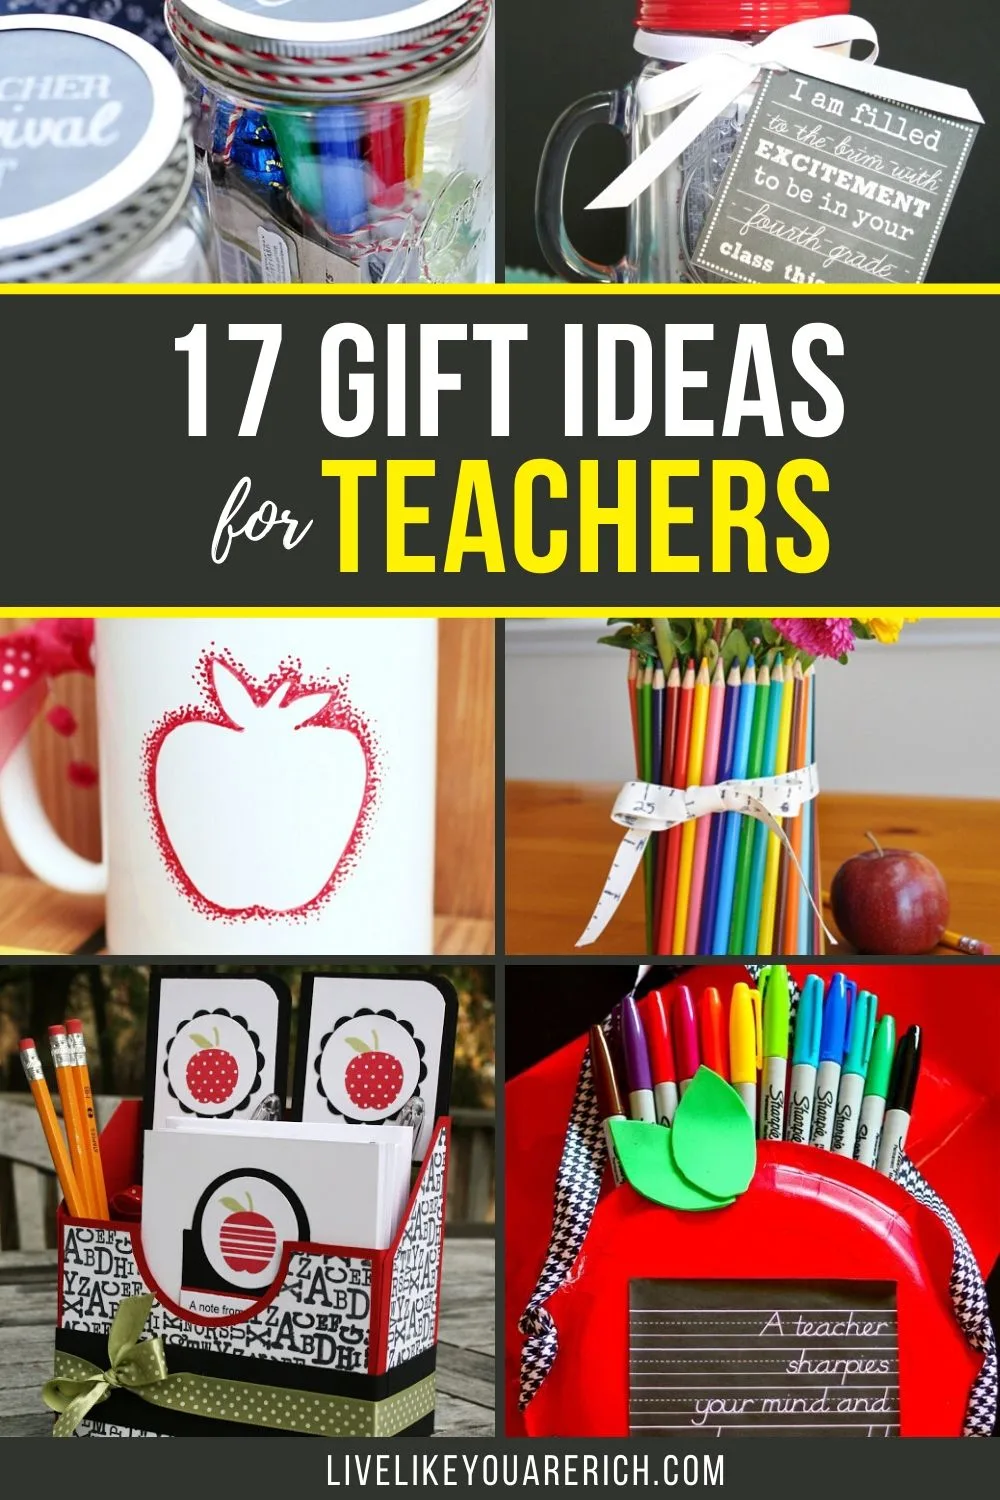 When I taught English in Taiwan, I loved it when I was given a gift. It showed me that the parents appreciated my teaching and working with their children. I’m a big fan of giving teachers gifts. Here are 17 useful, fun, and creative gift ideas for the teachers in your children’s lives.